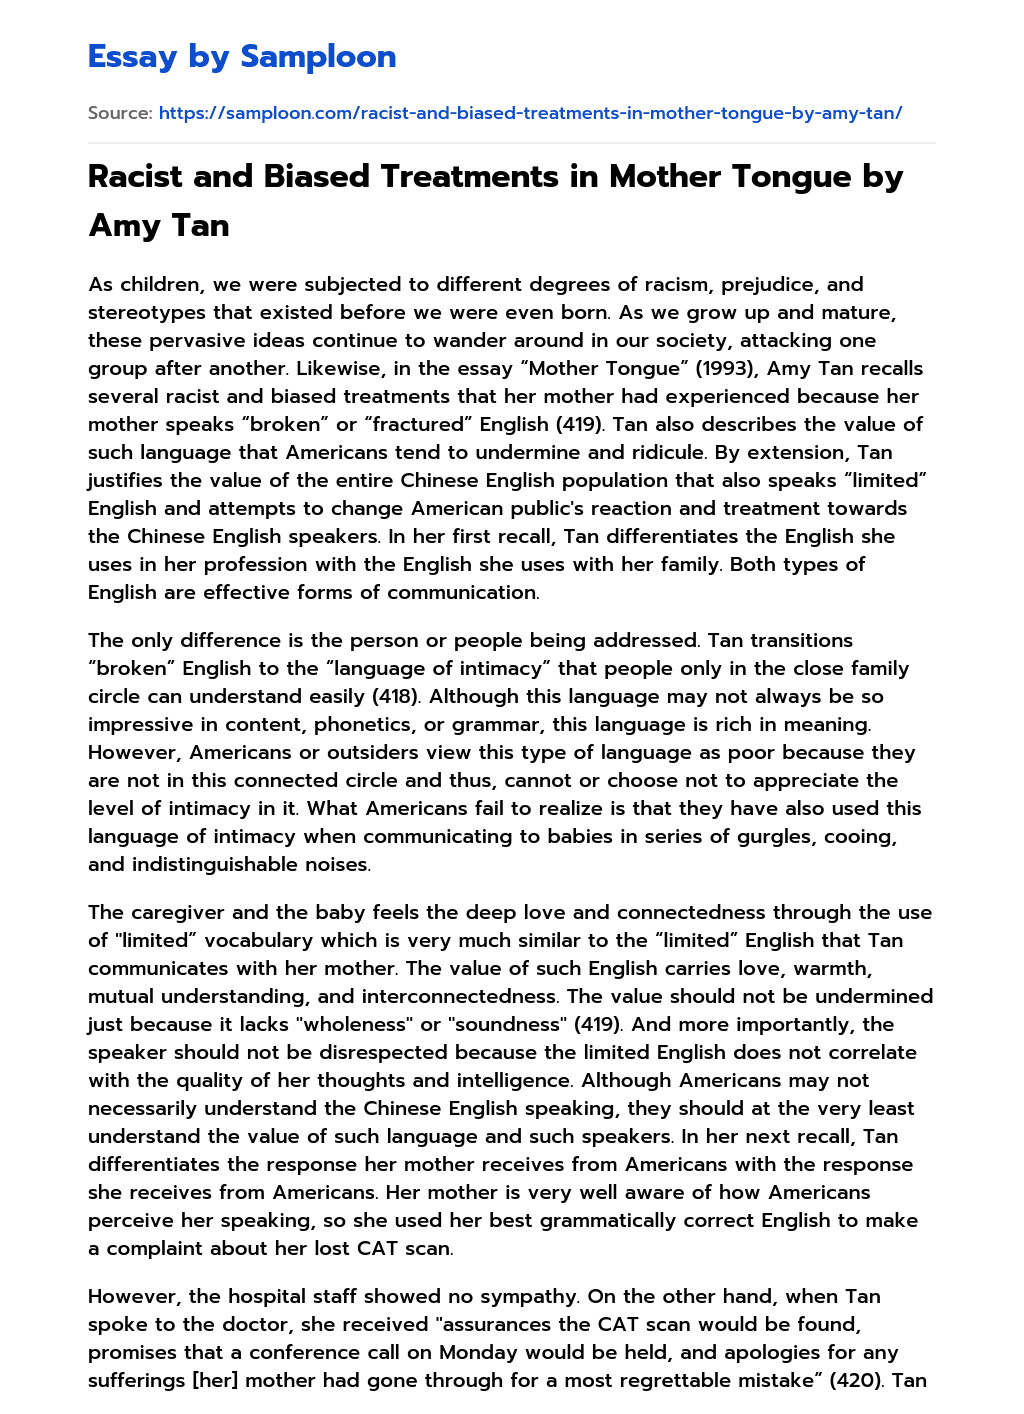 Racist and Biased Treatments in Mother Tongue by Amy Tan essay